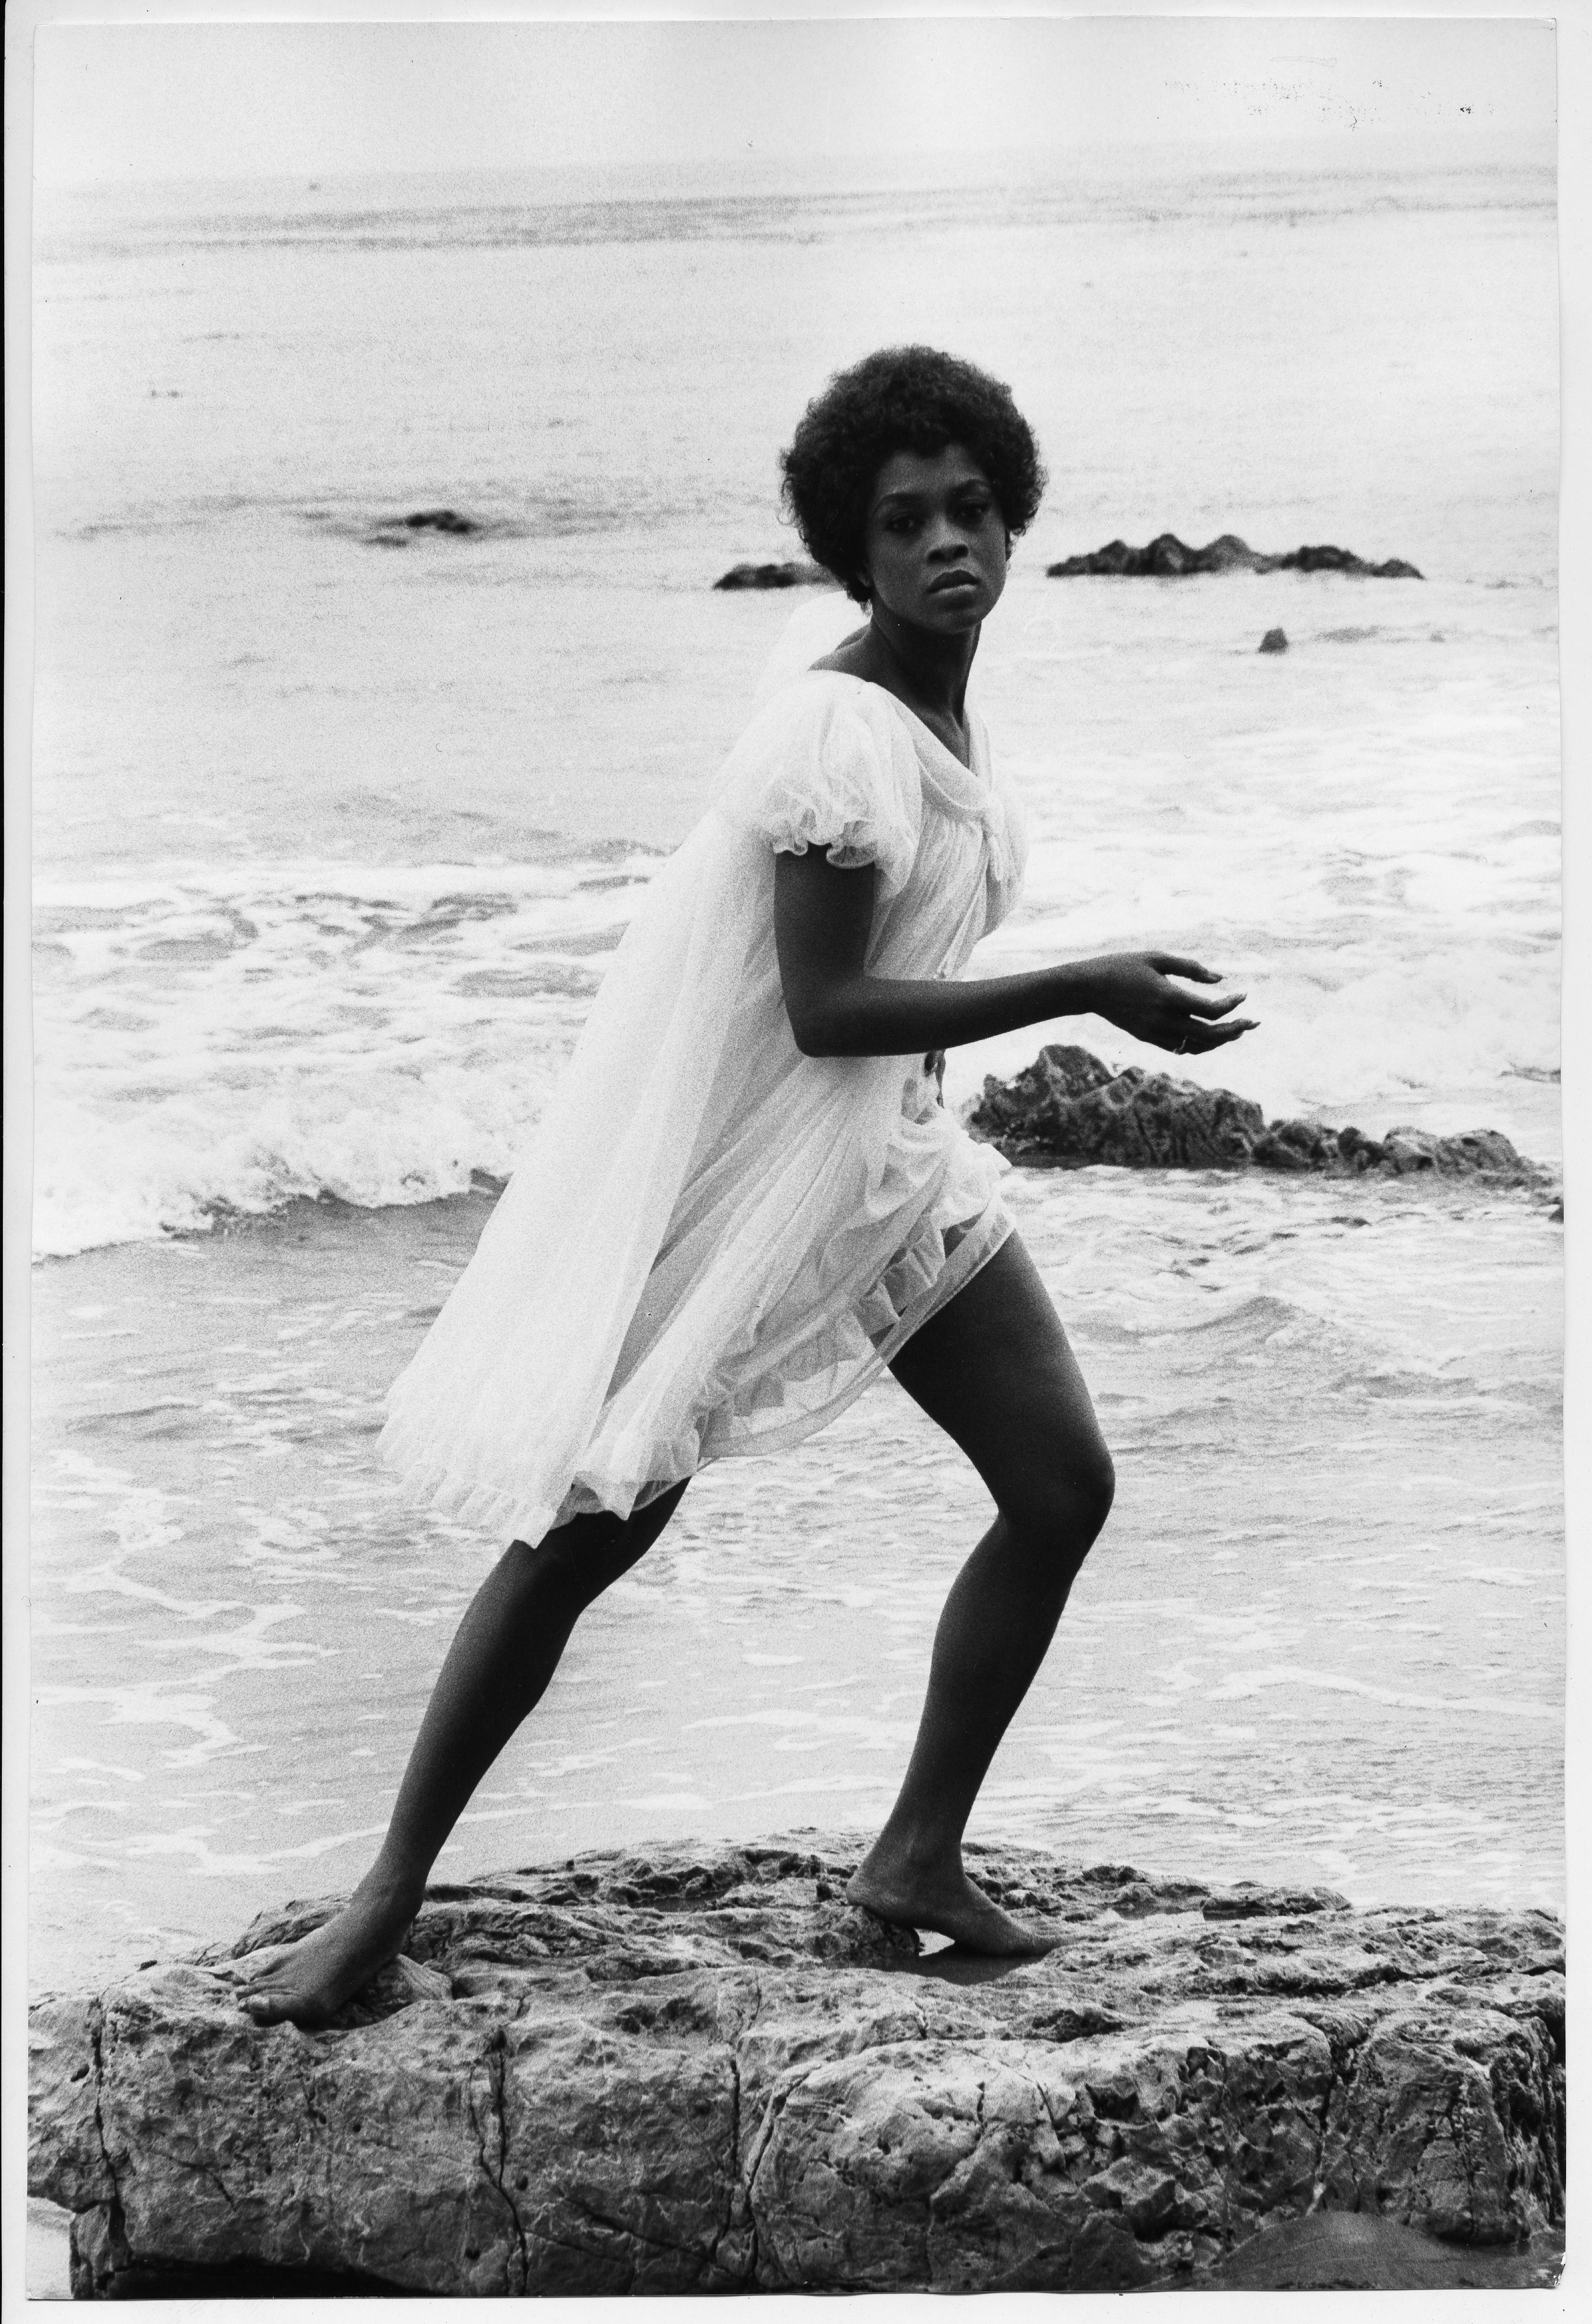 LOLA FALANA VINTAGE 8 X 10 PHOTOGRAPH FROM IRVING KLAWS ARCHIVES 